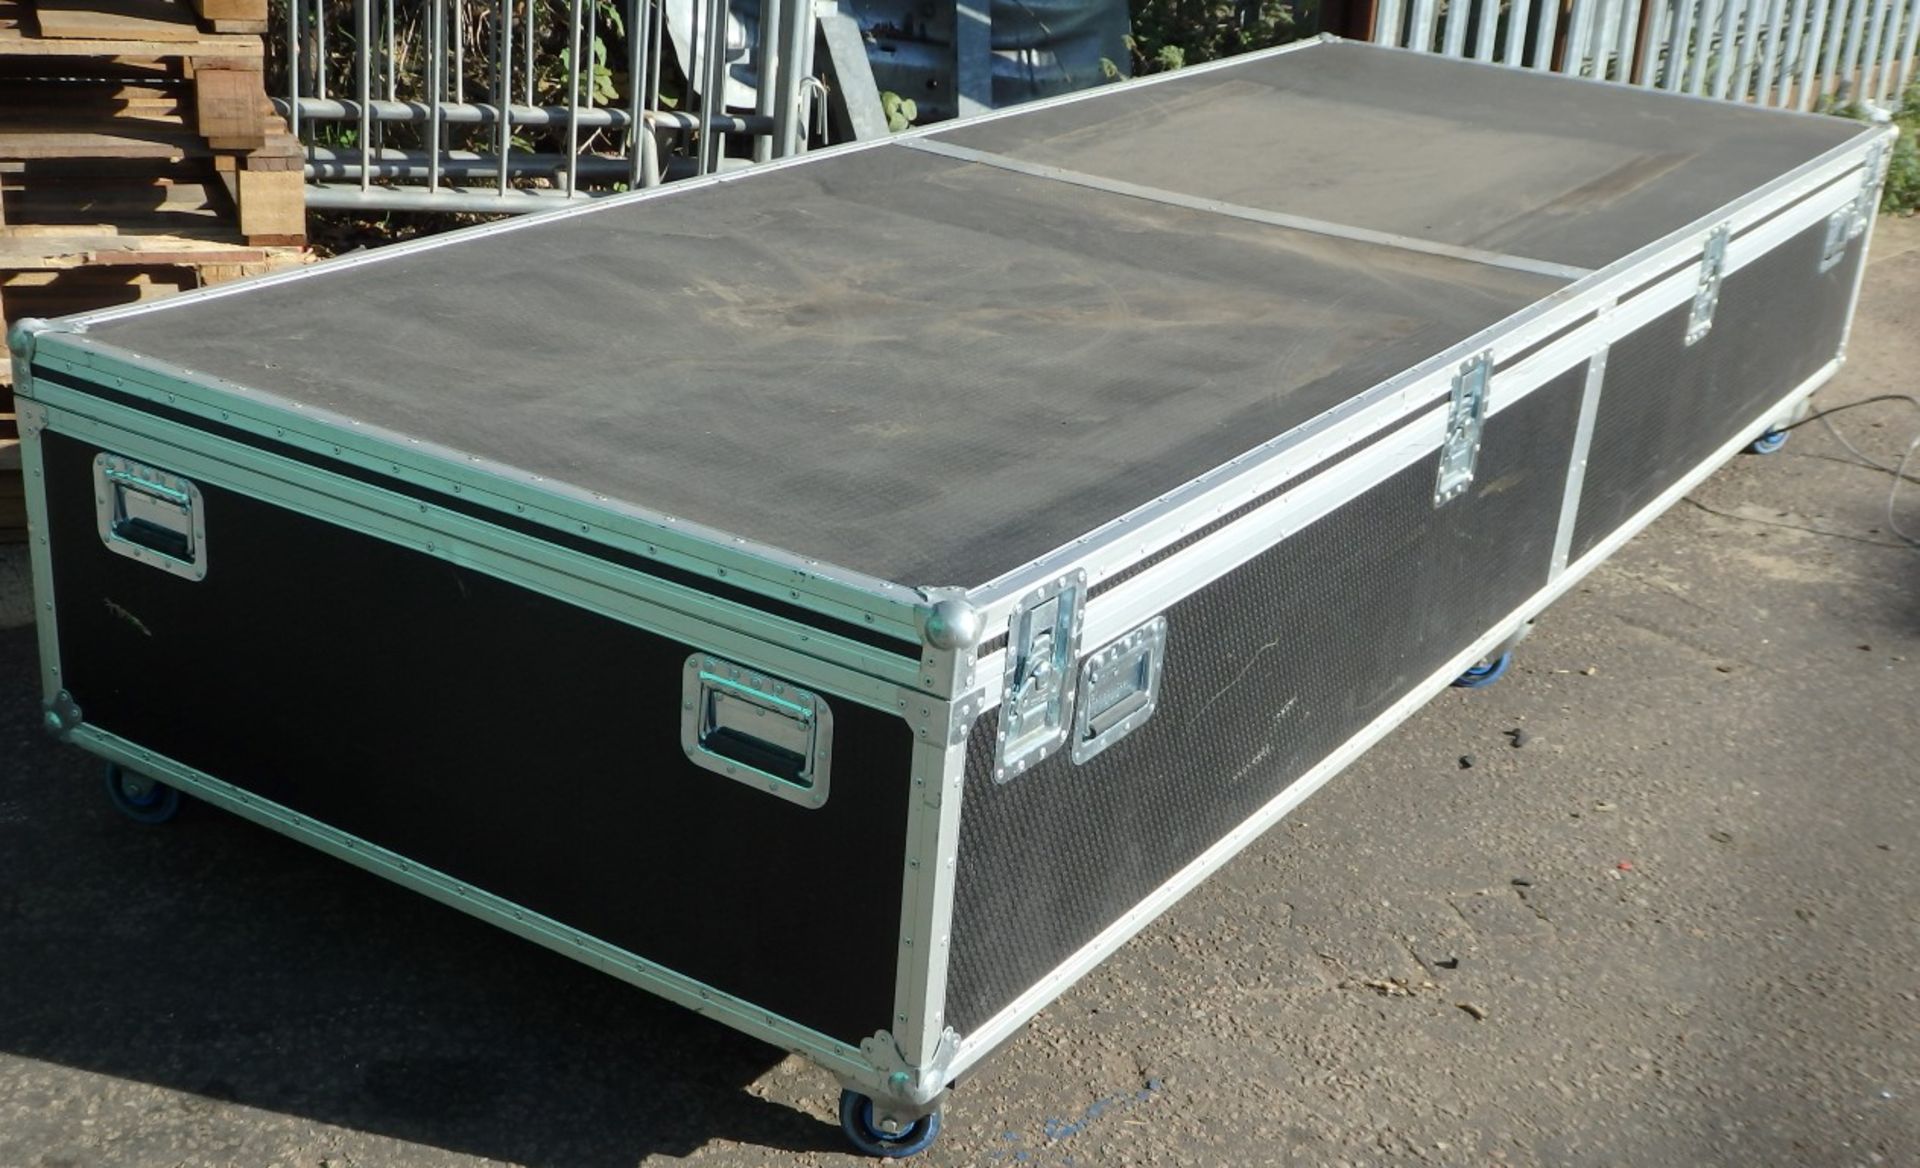 1 x Large Black Oakleigh Security Flight Case 318cm x 115cm x depth 46cm (height 60cm with - Image 6 of 7